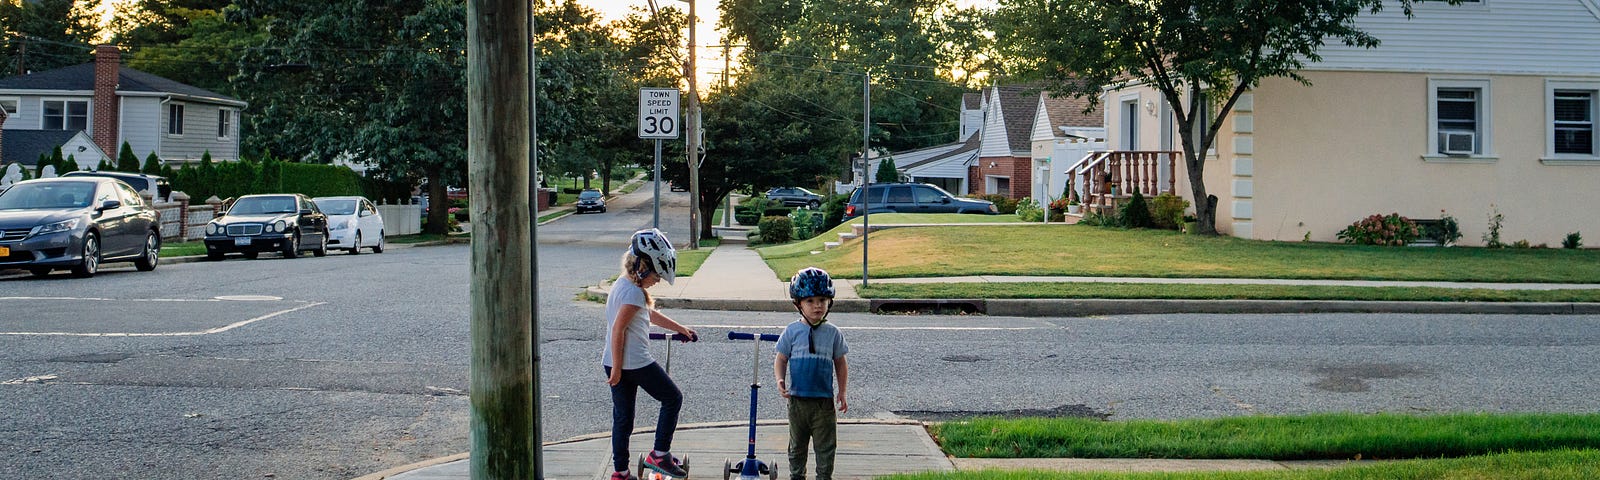 Two children stand on a residential street corner with their scooters.